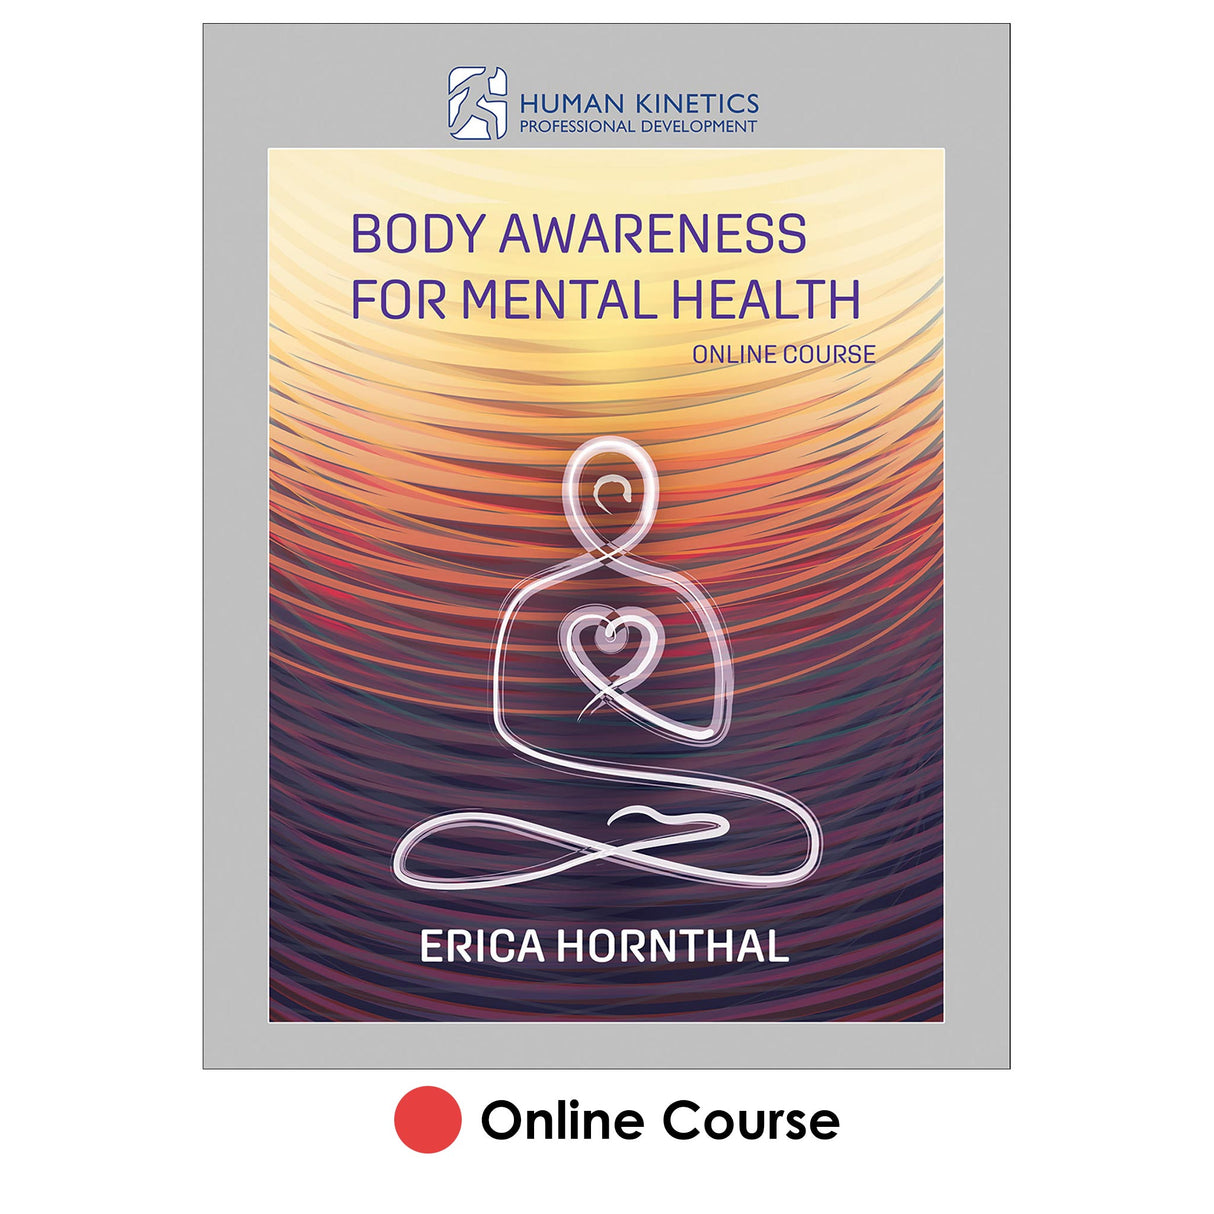 Body Awareness for Mental Health Online Course